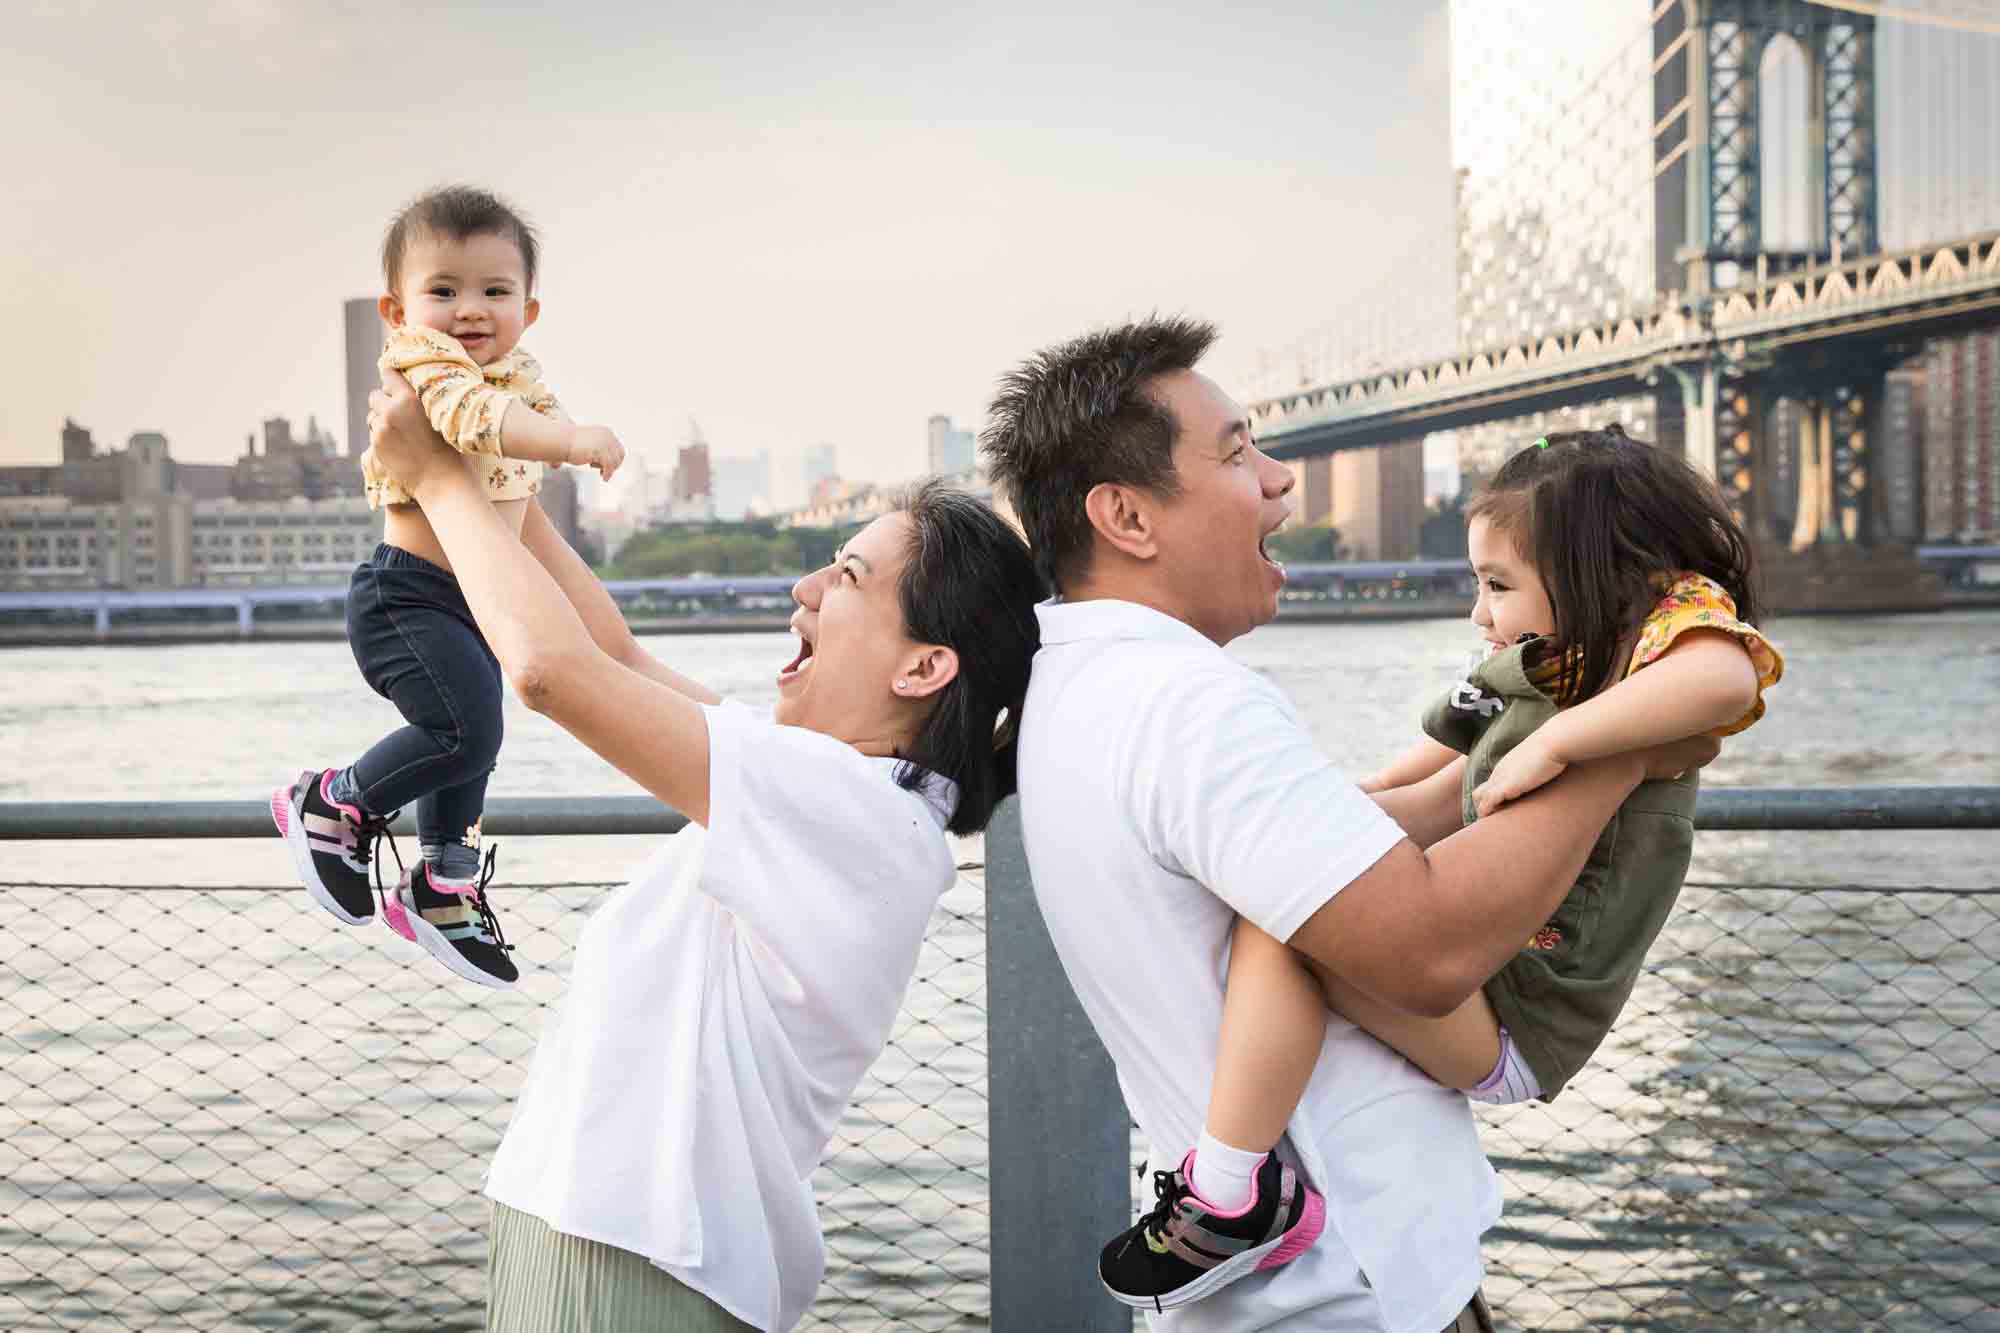 Parents holding two young children in the air in front of waterfront for an article on Brooklyn Bridge Park family portrait tips for young children